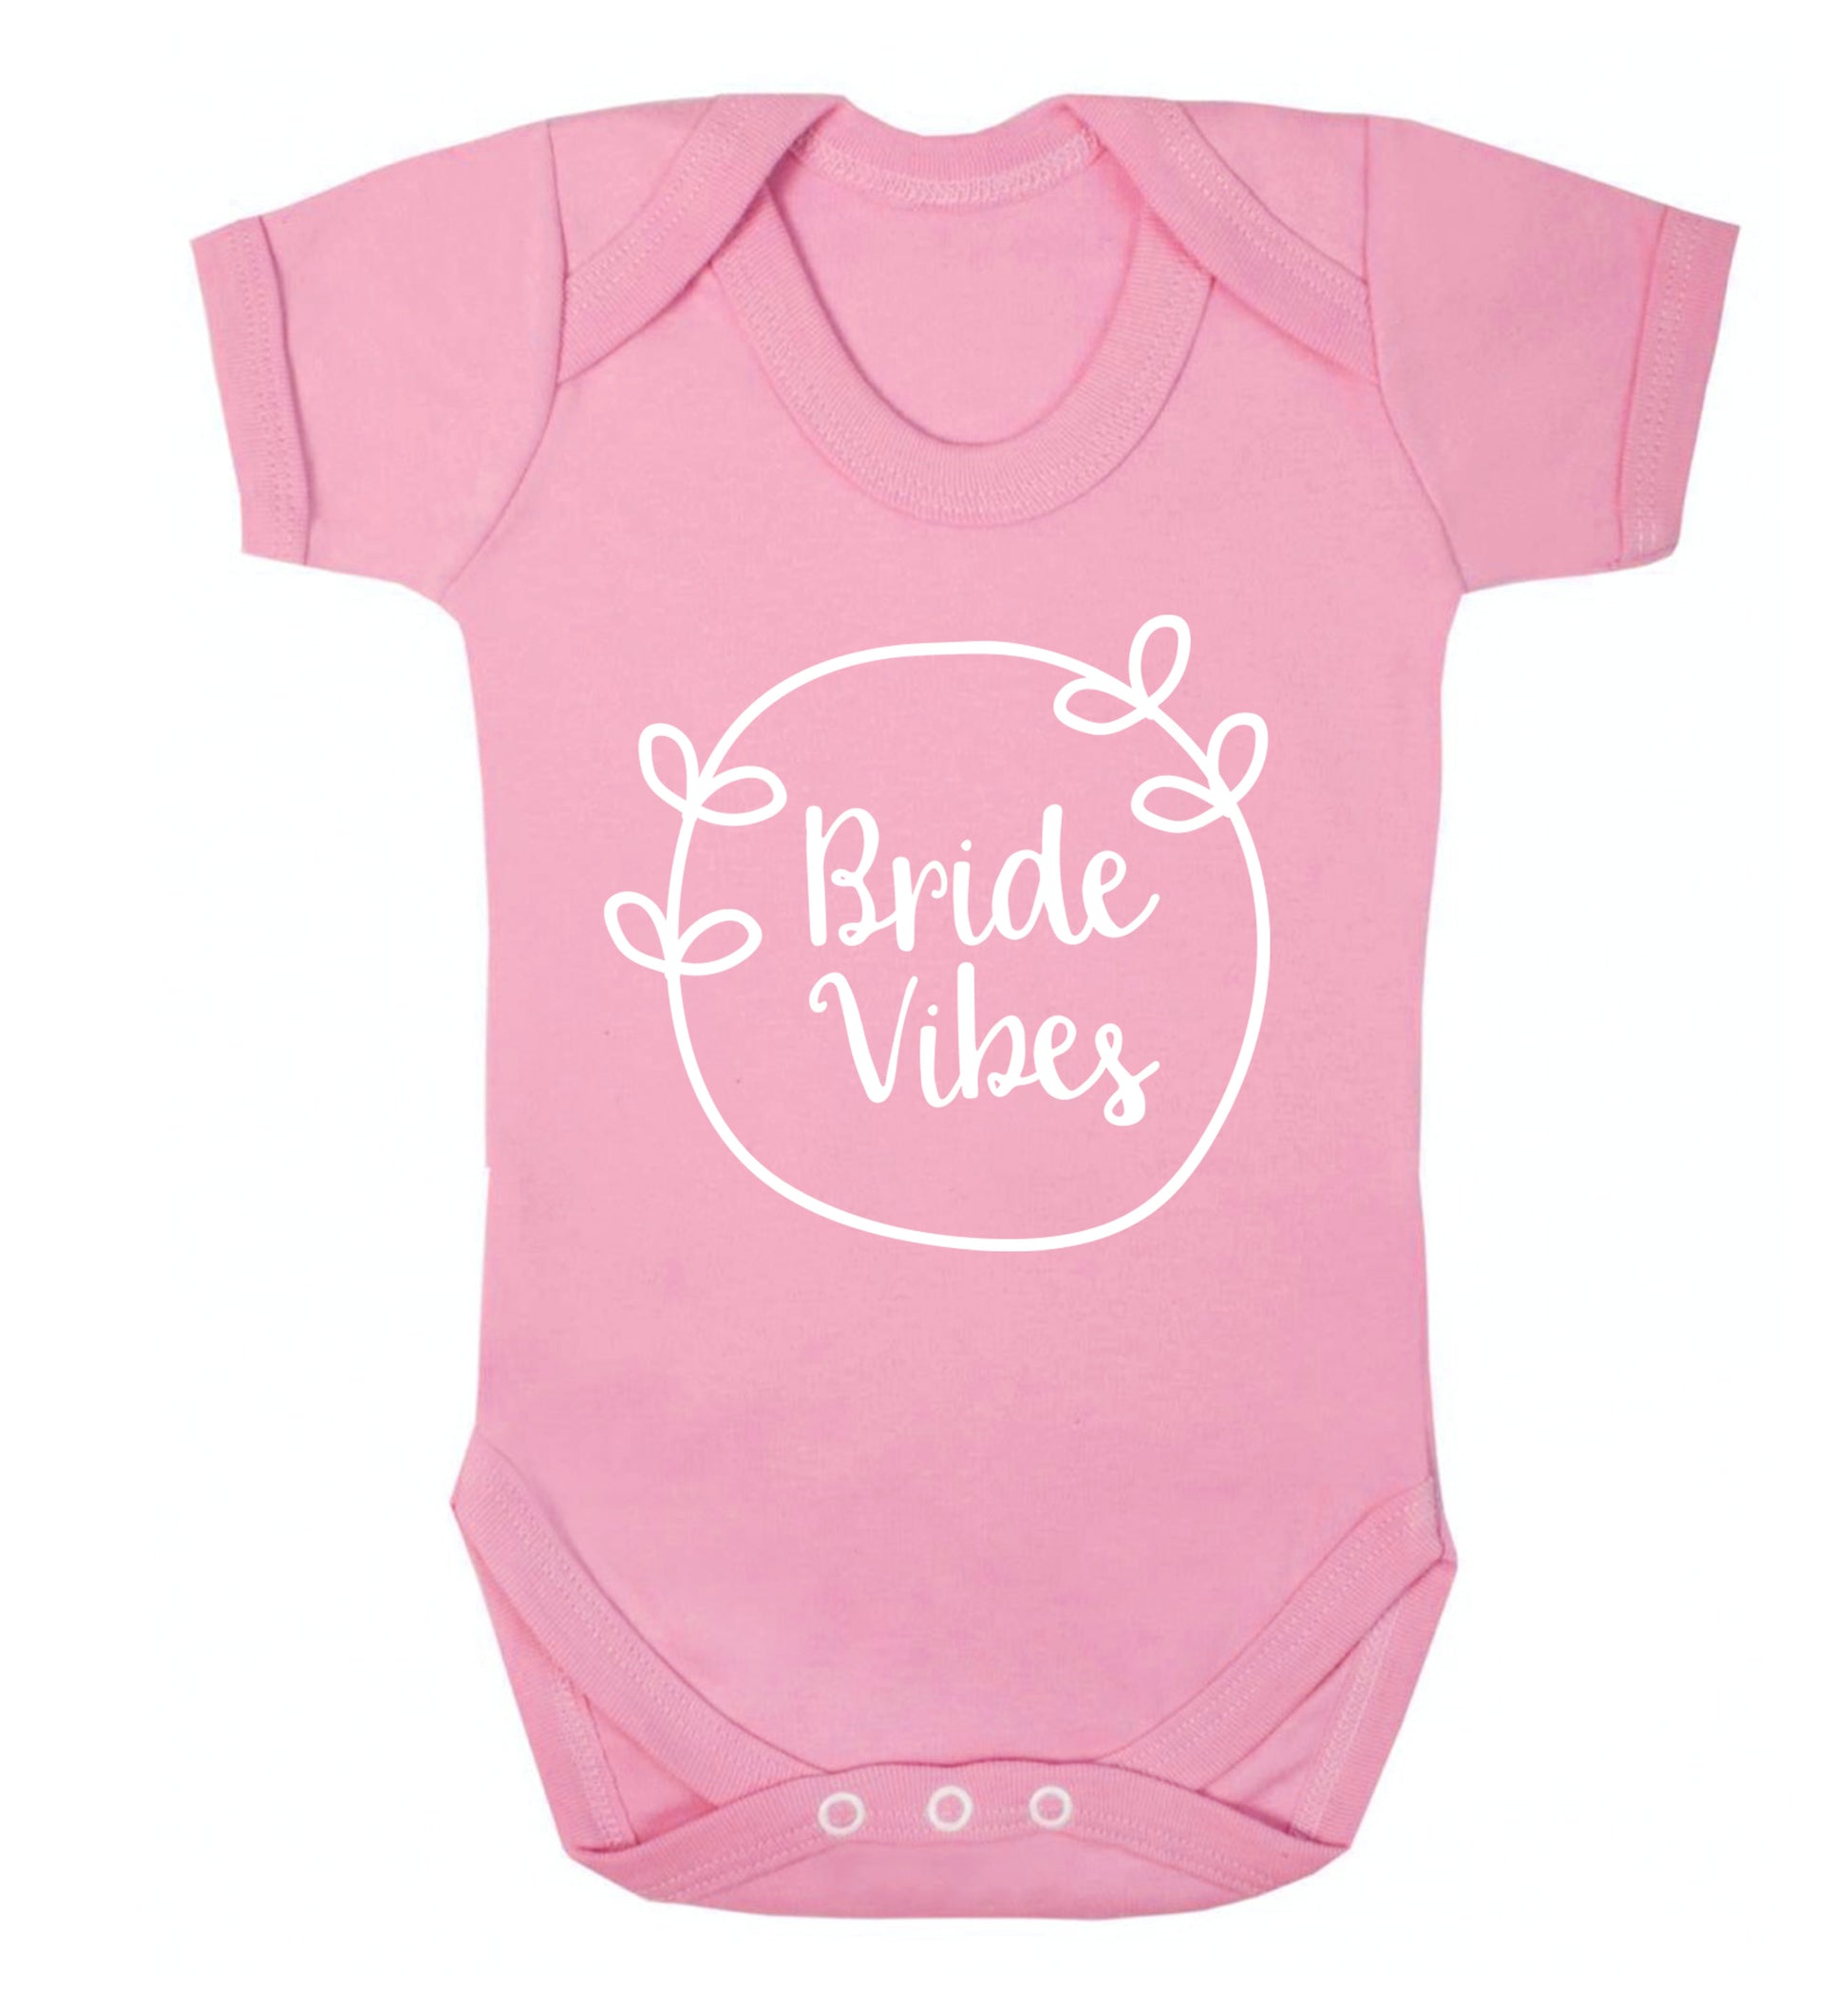 Bride Vibes Baby Vest pale pink 18-24 months